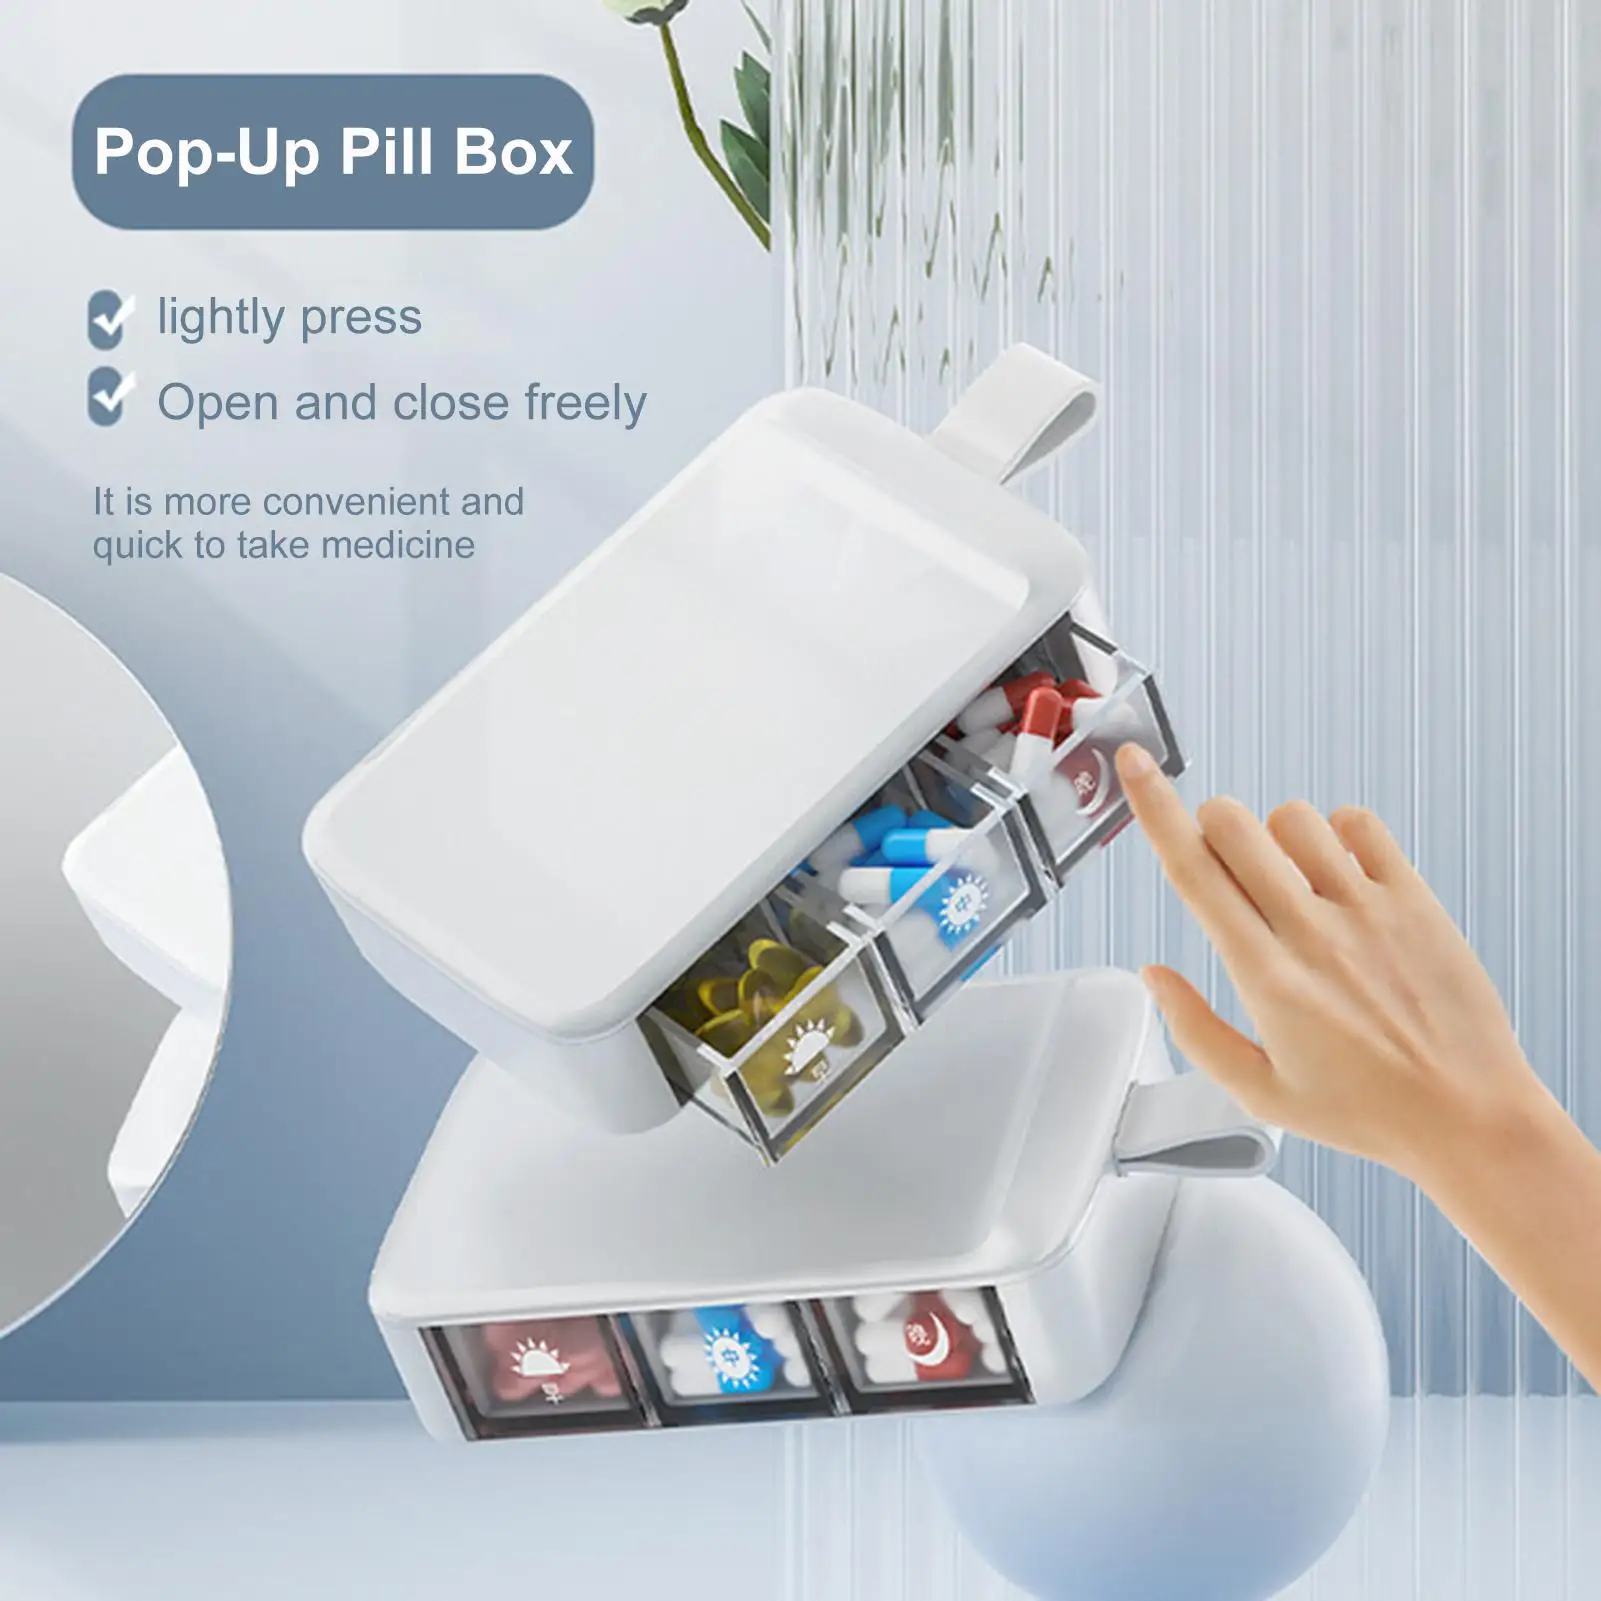 

Portable Pill Storage Box 3 Grids Weekly Pill Case Travel Medicine Box Container Tablet Organizer Fish Oil Vitamin Box on Trip